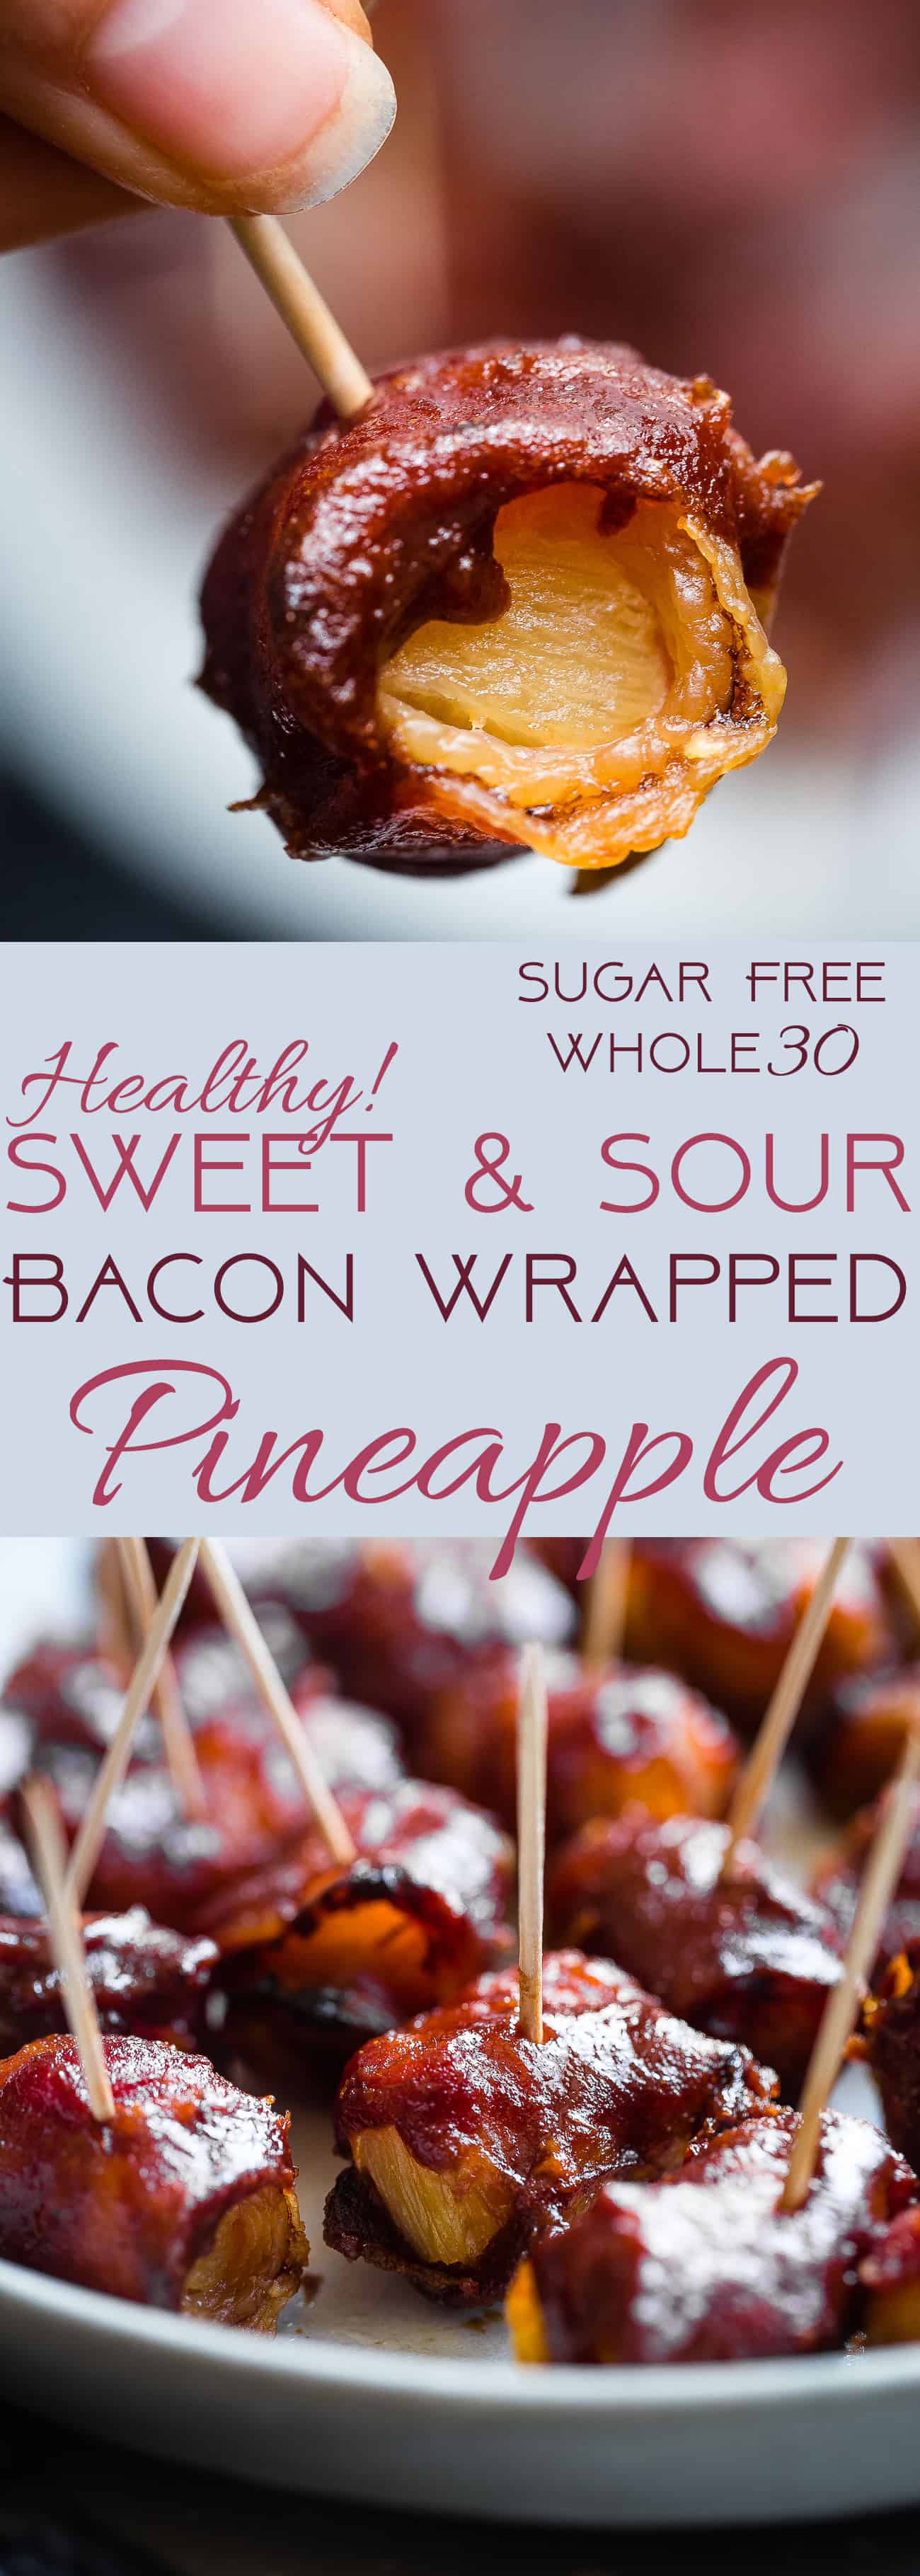 Whole30 Sweet and Sour Bacon Wrapped Pineapple Bites - Salty, sweet and so addicting! An easy healthy and paleo friendly appetizer that you would never believe is gluten/grain/dairy/sugar free and only 35 calories a bite! | Foodfaithfitness.com | @Foodfaithfit | healthy appetizers. paleo appetizers. whole30 appetizers. bacon wrapped water chestnuts. party food. gluten free bacon wrapped pineapple